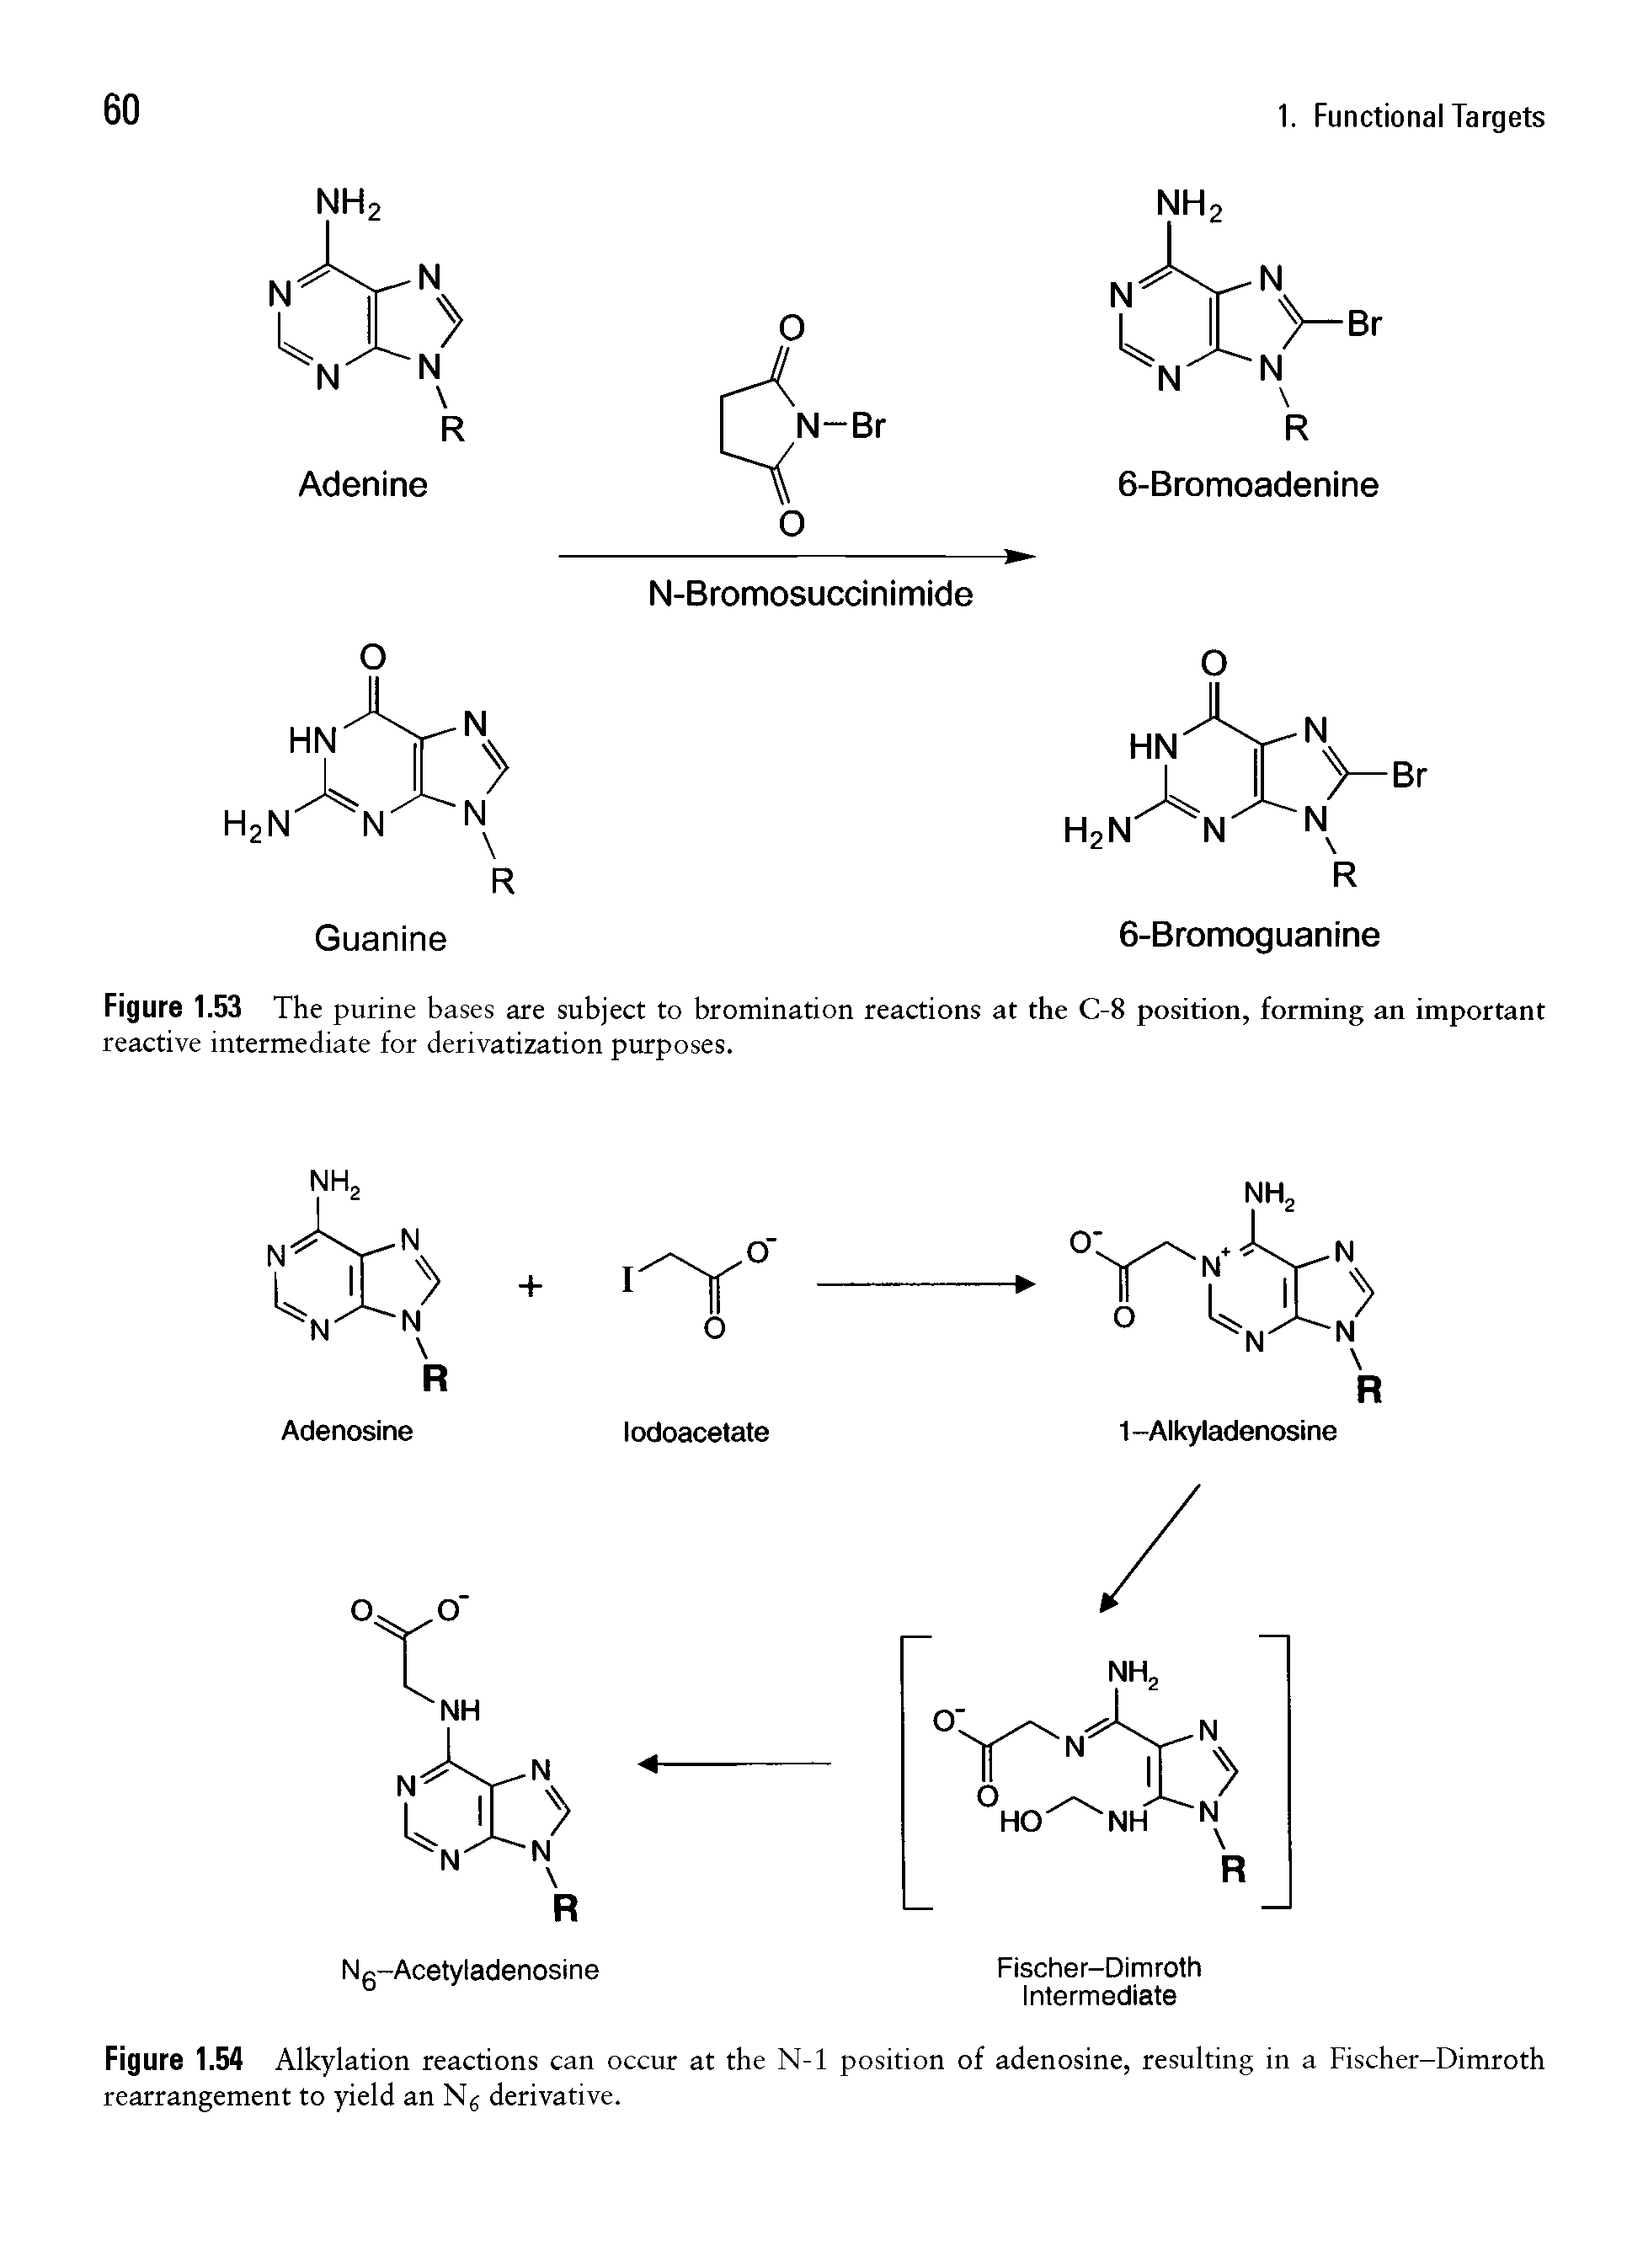 Figure 1.53 The purine bases are subject to bromination reactions at the C-8 position, forming an important reactive intermediate for derivatization purposes.